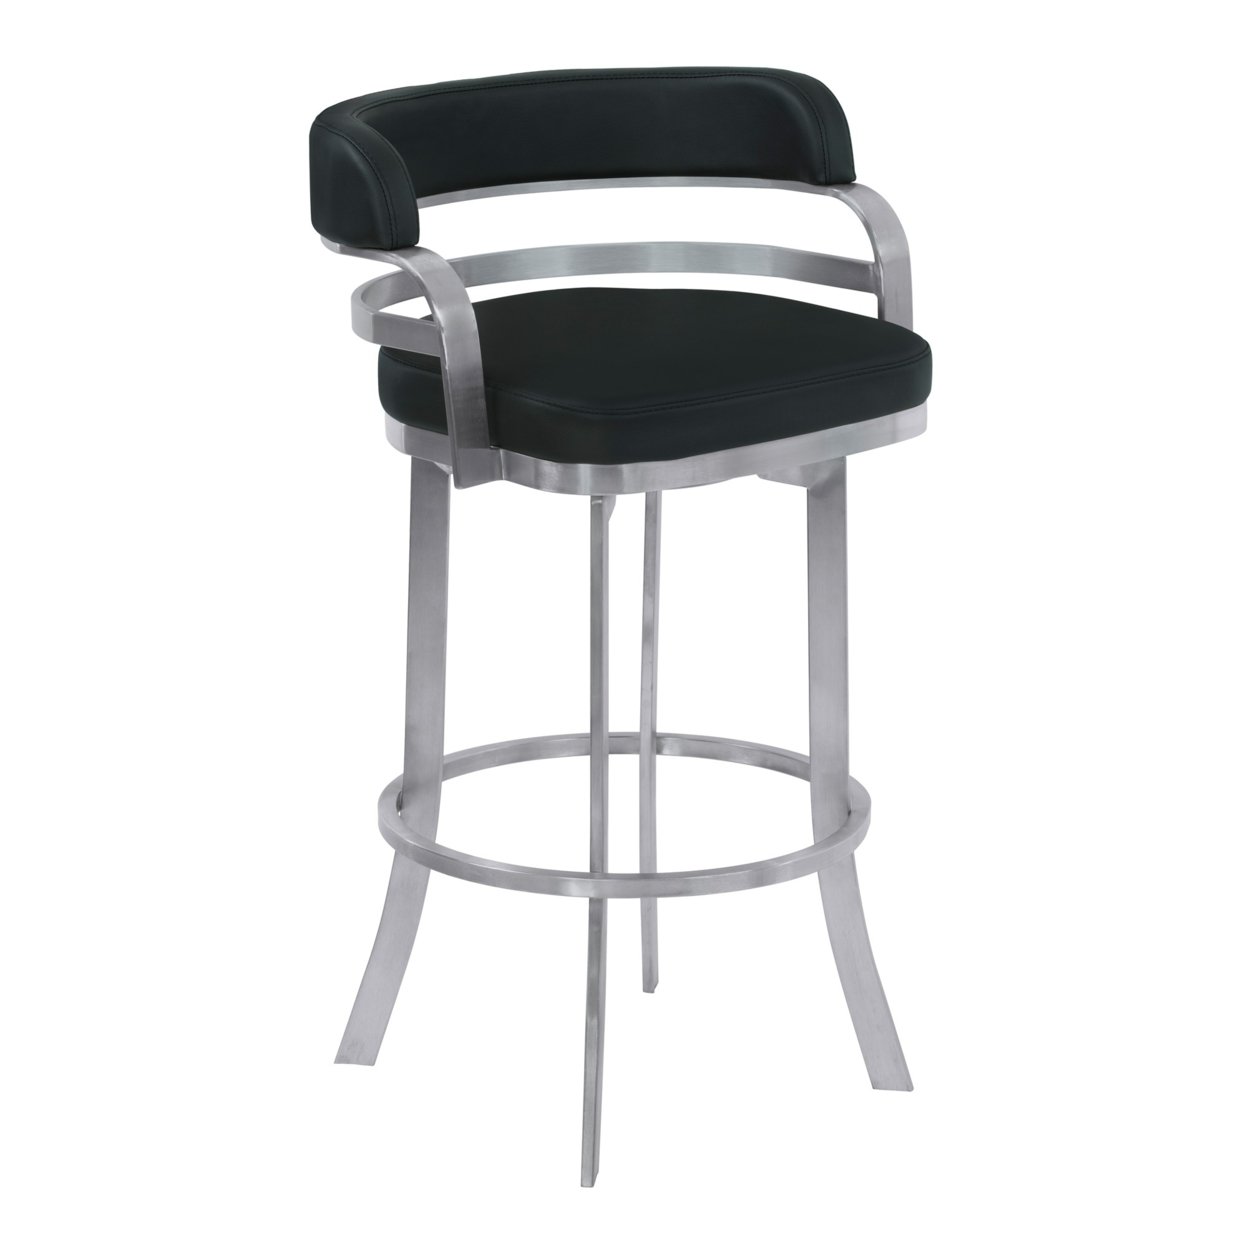 Metal Frame Barstool With Curved Leatherette Seating, Black And Silver- Saltoro Sherpi